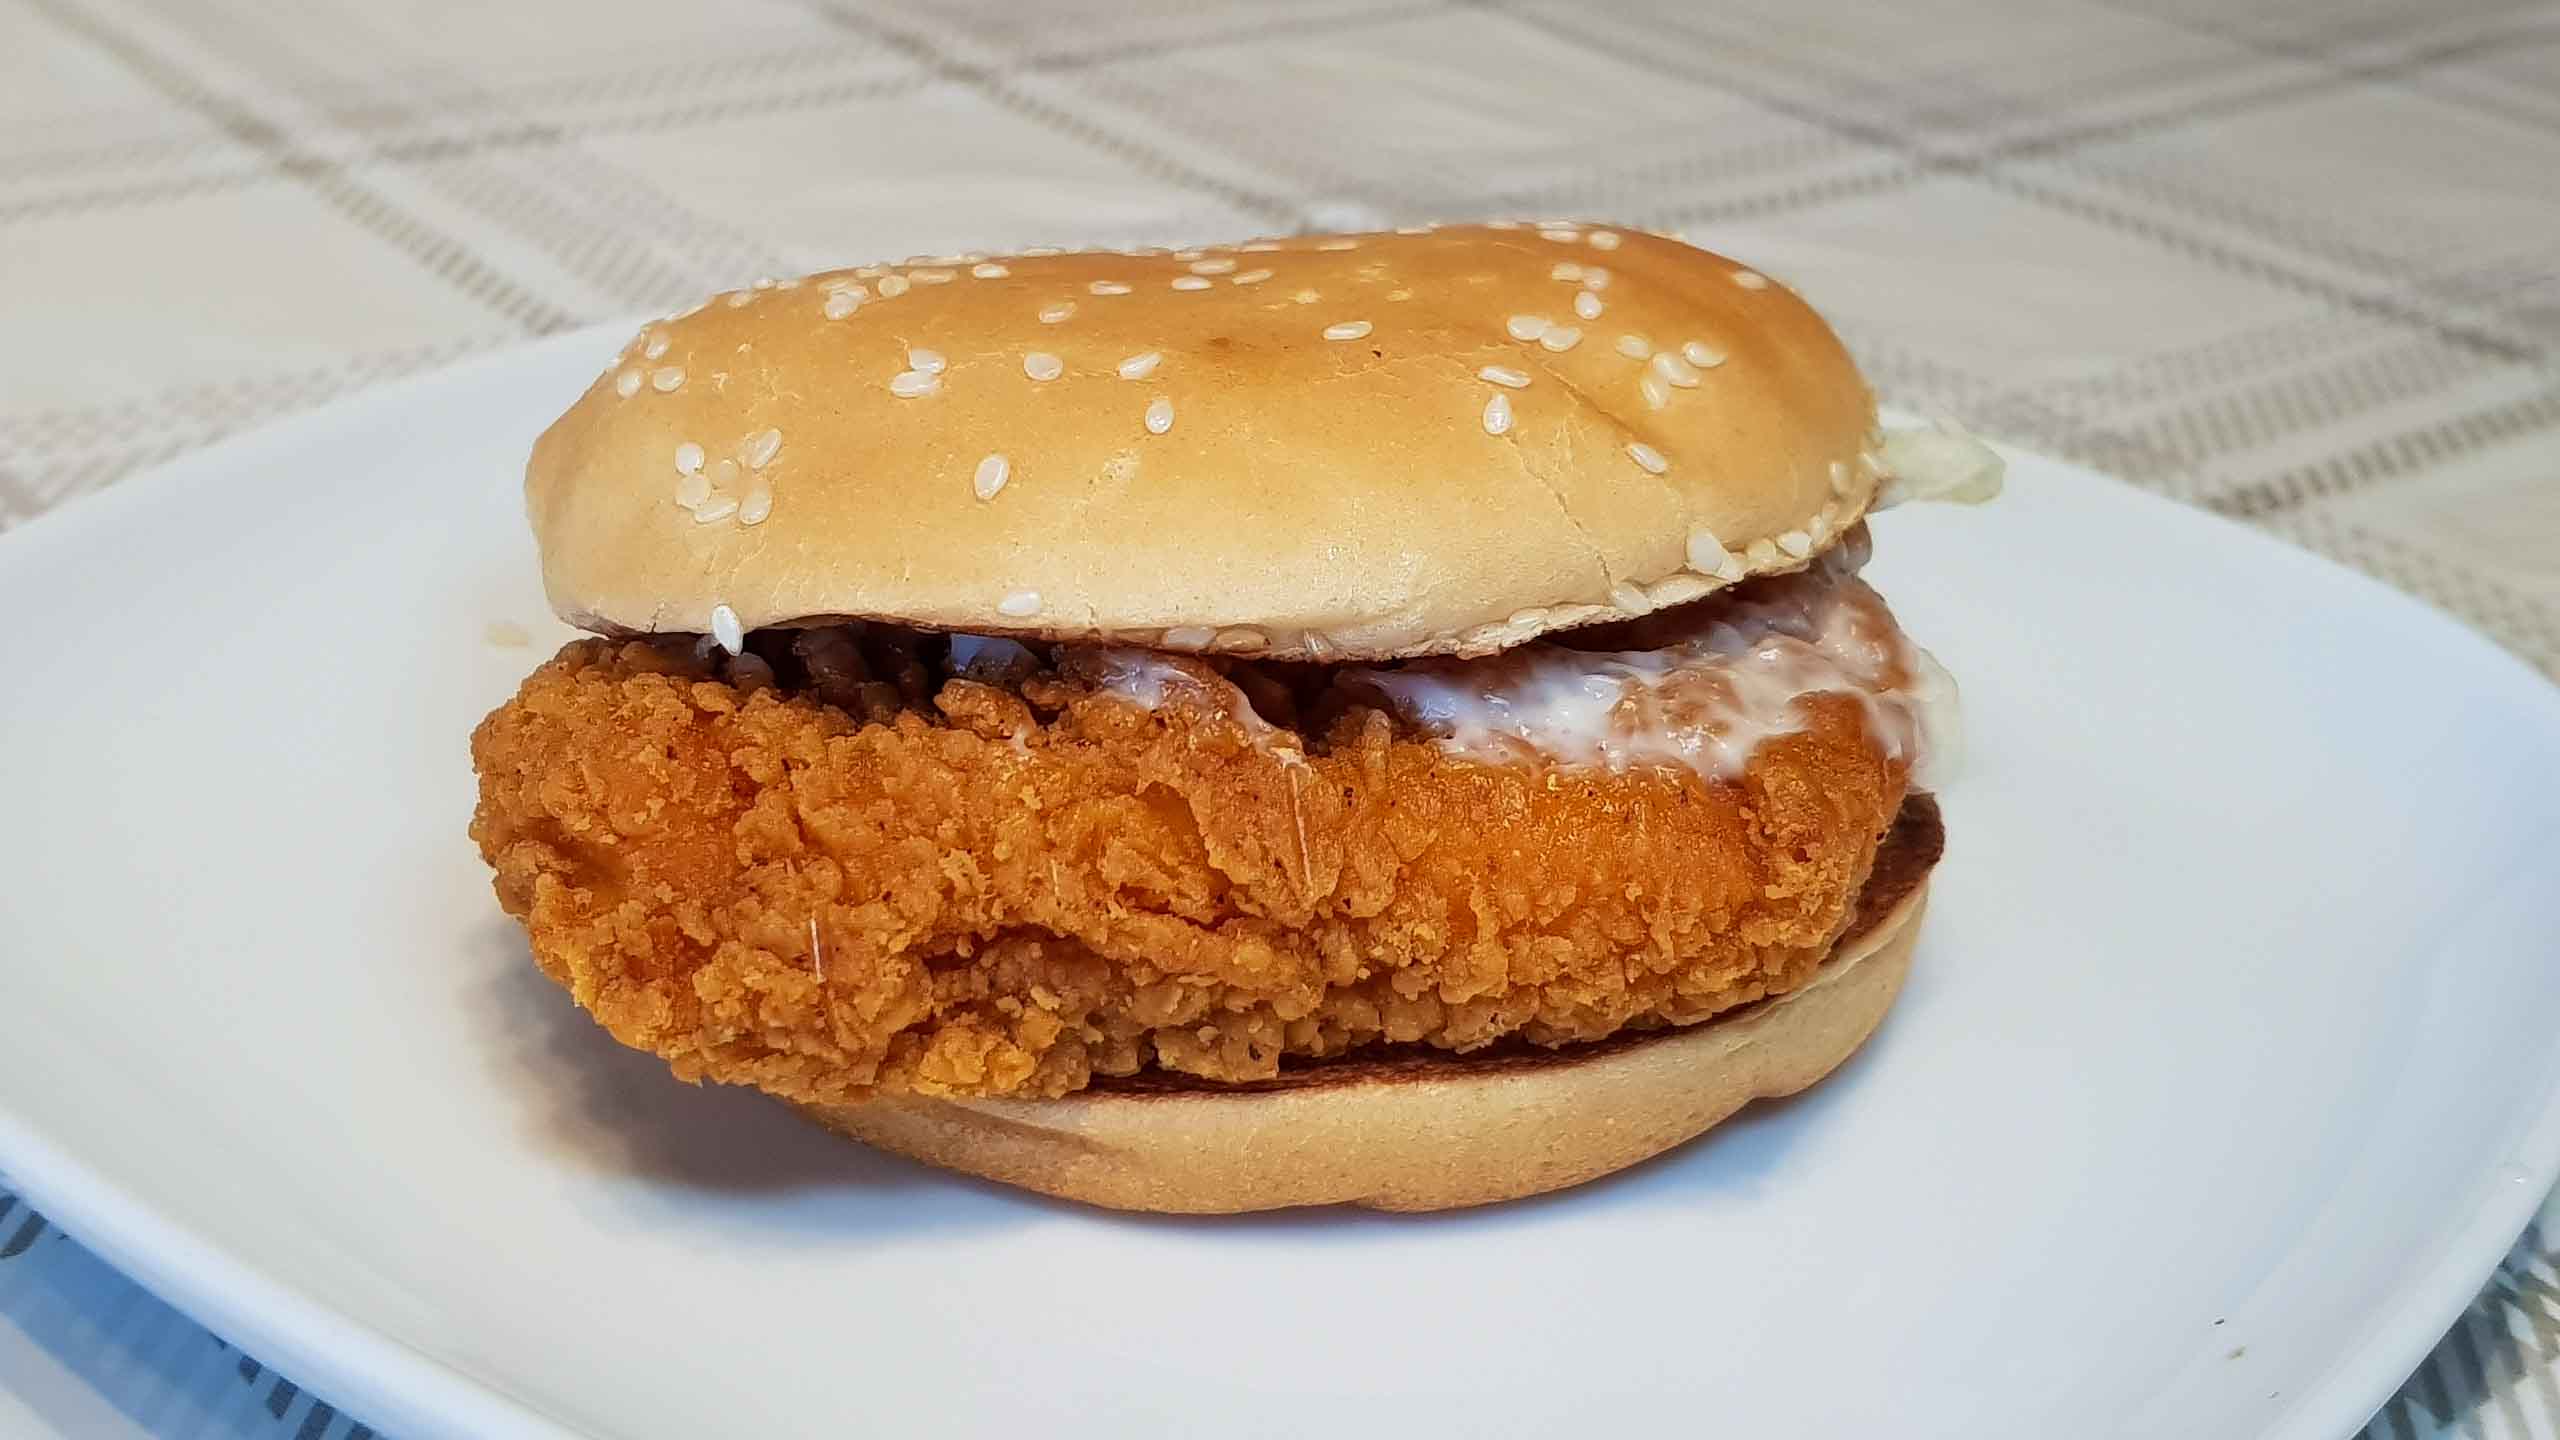 McDonald’s McSpicy burger review: Is it spicy?